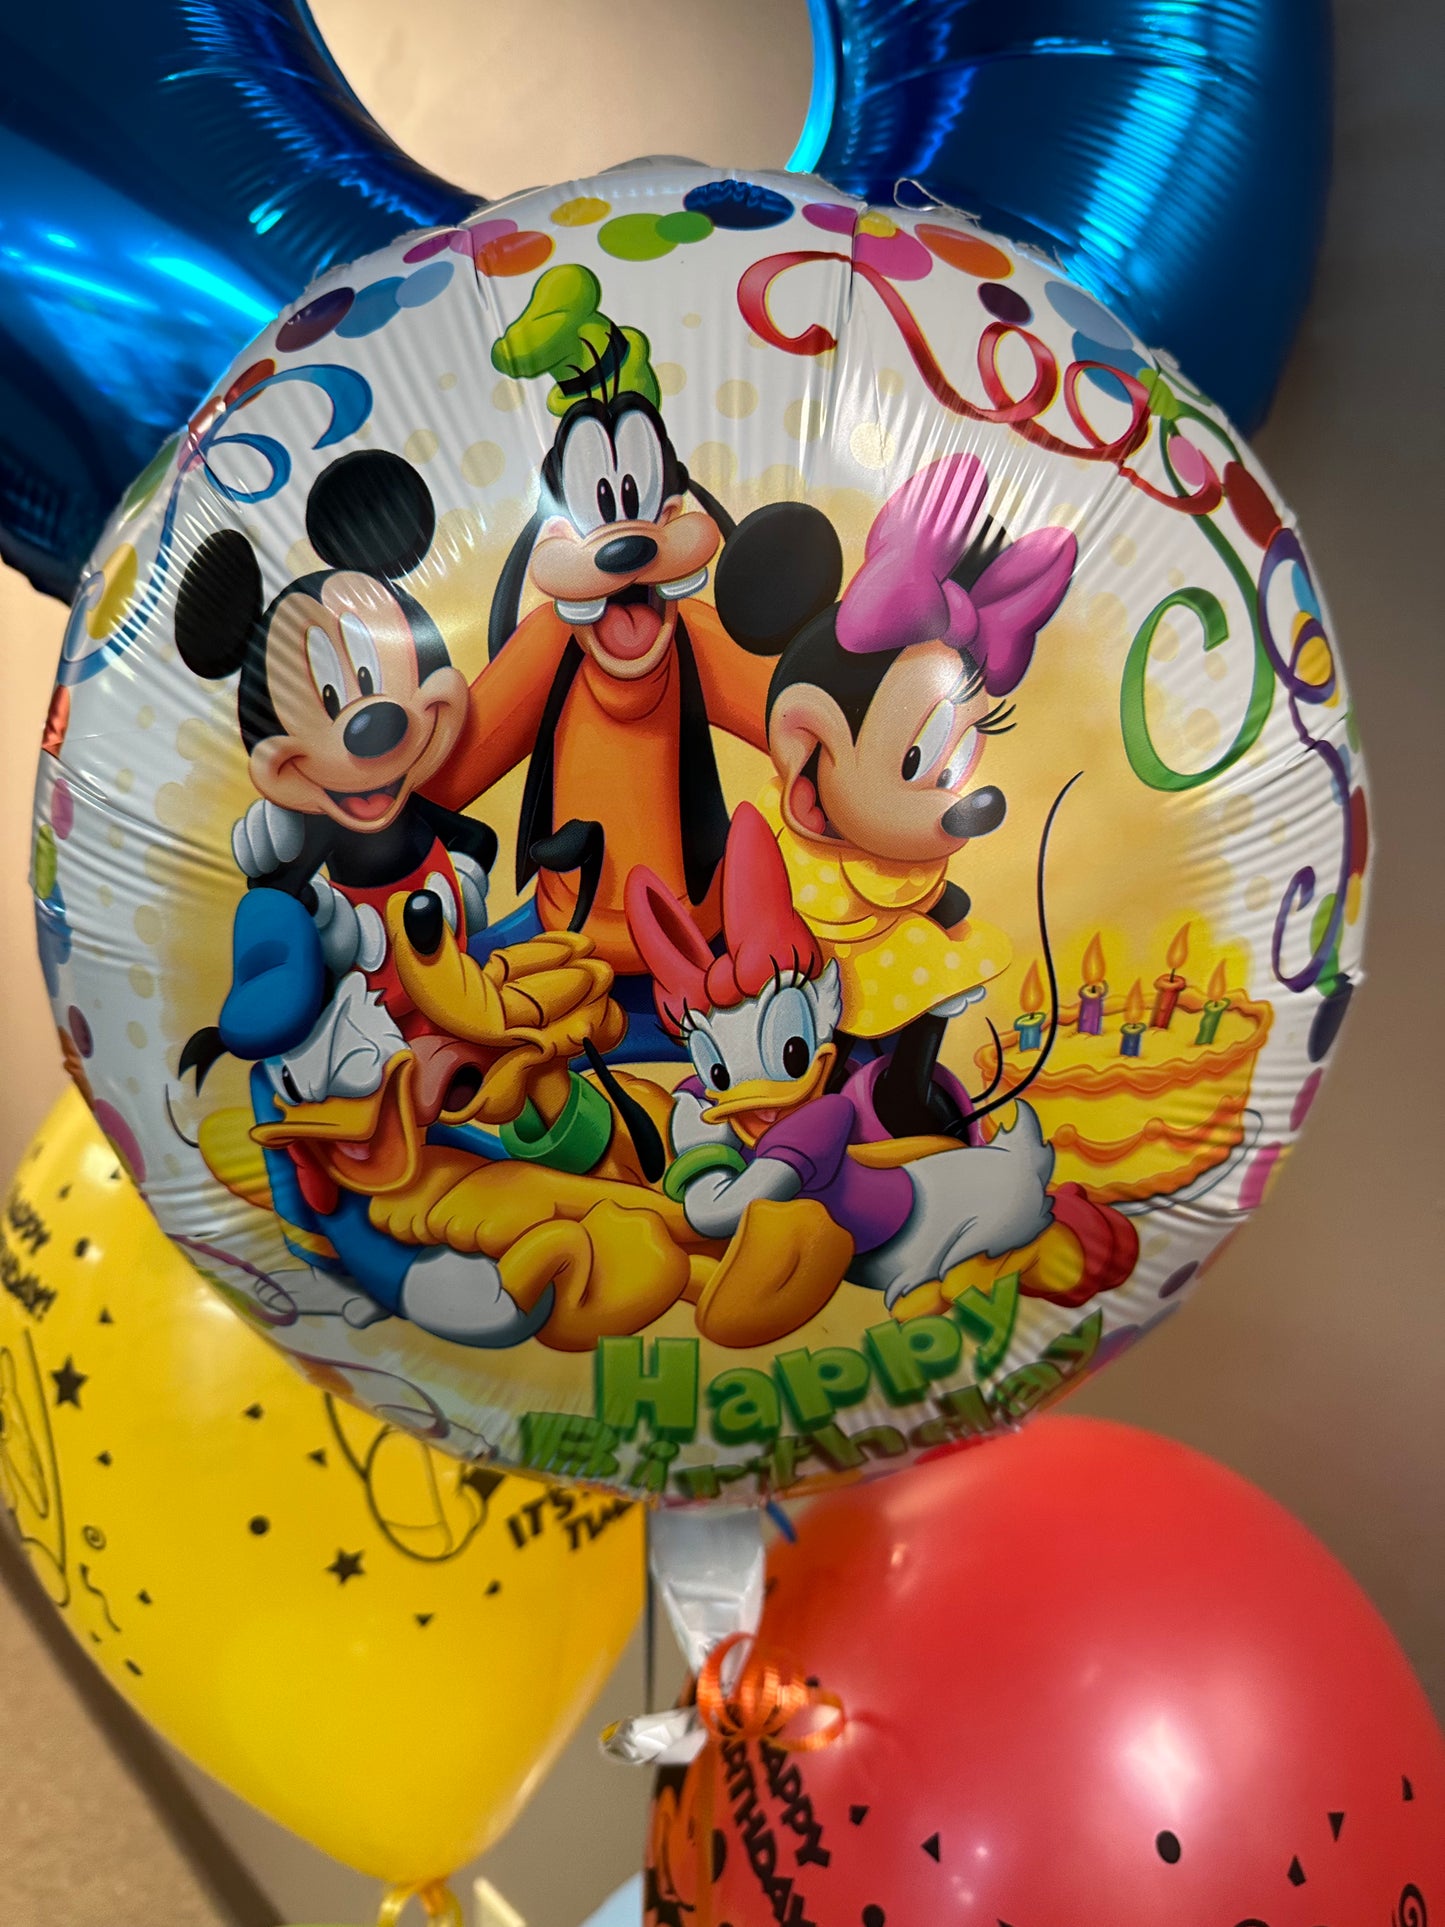 HBD Mickey & Friends Party